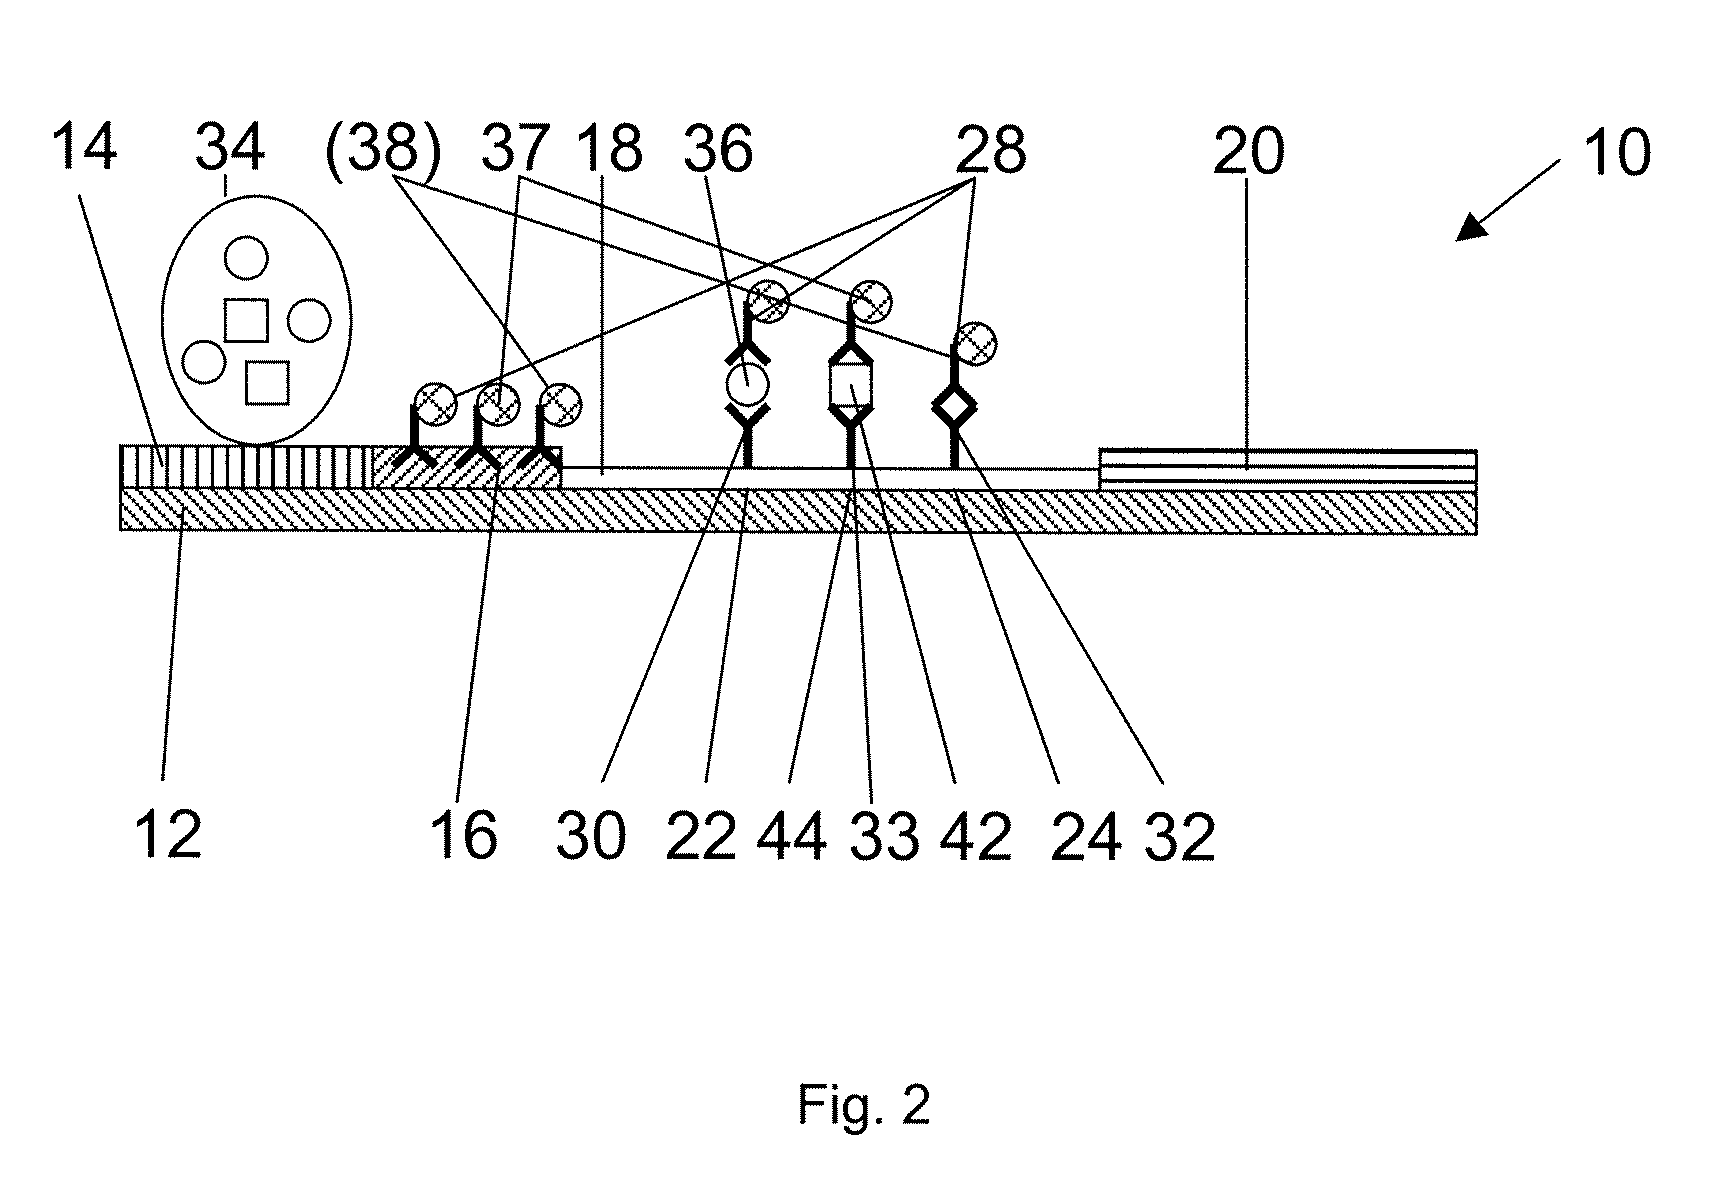 Detection test assembly for detecting the presence of a substance in a sample